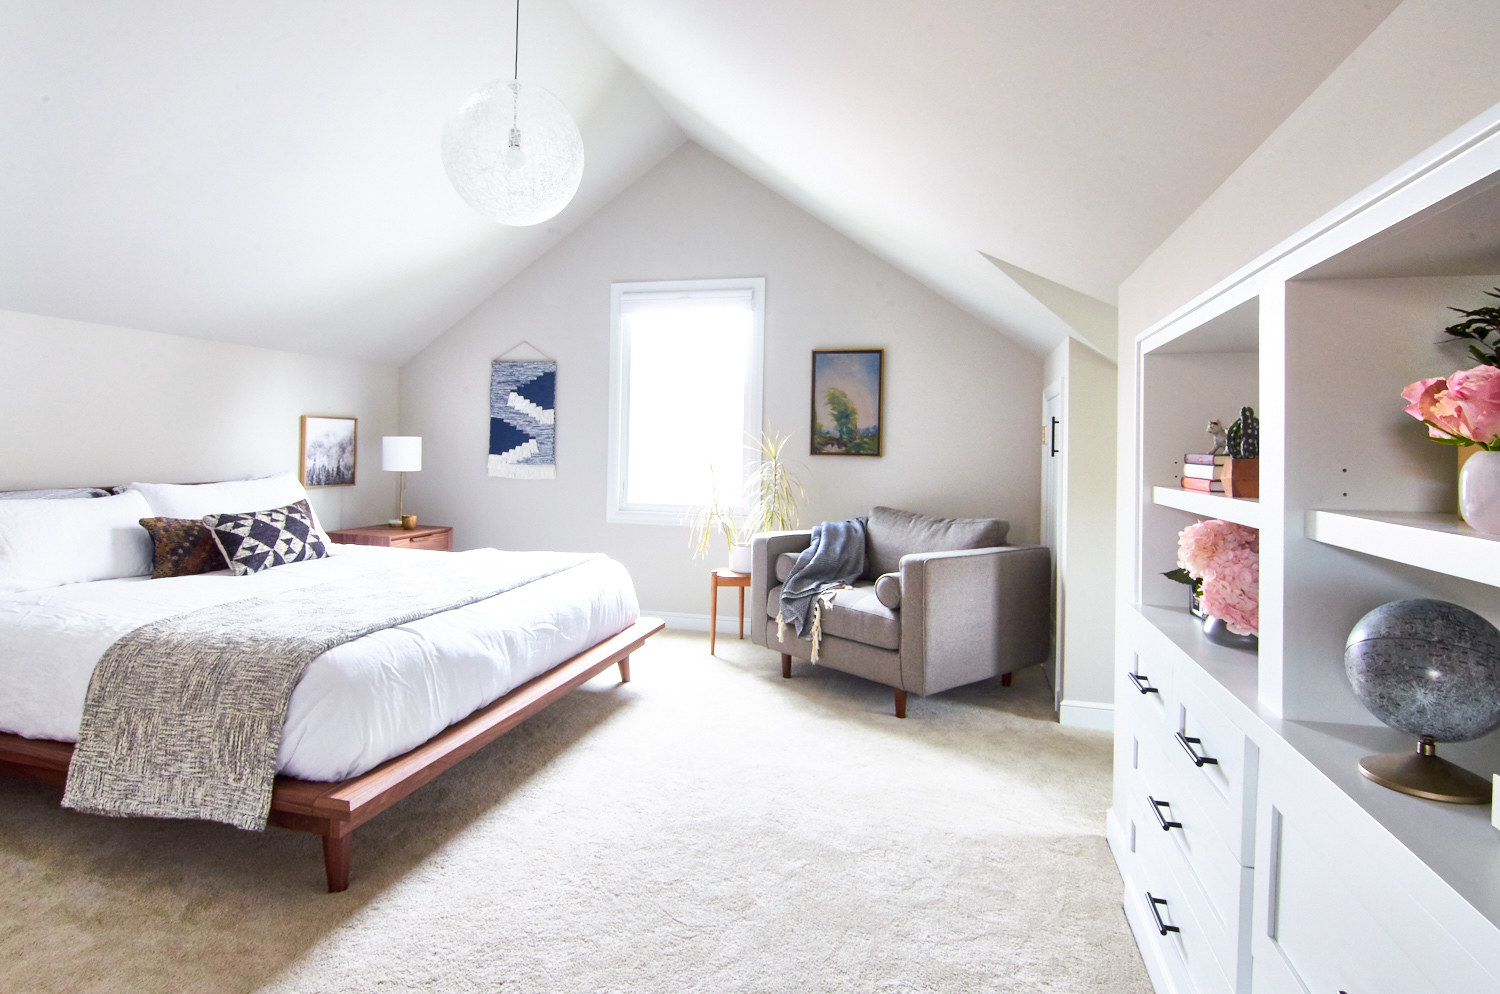 Light and airy upstairs bedroom with a pitch roof.